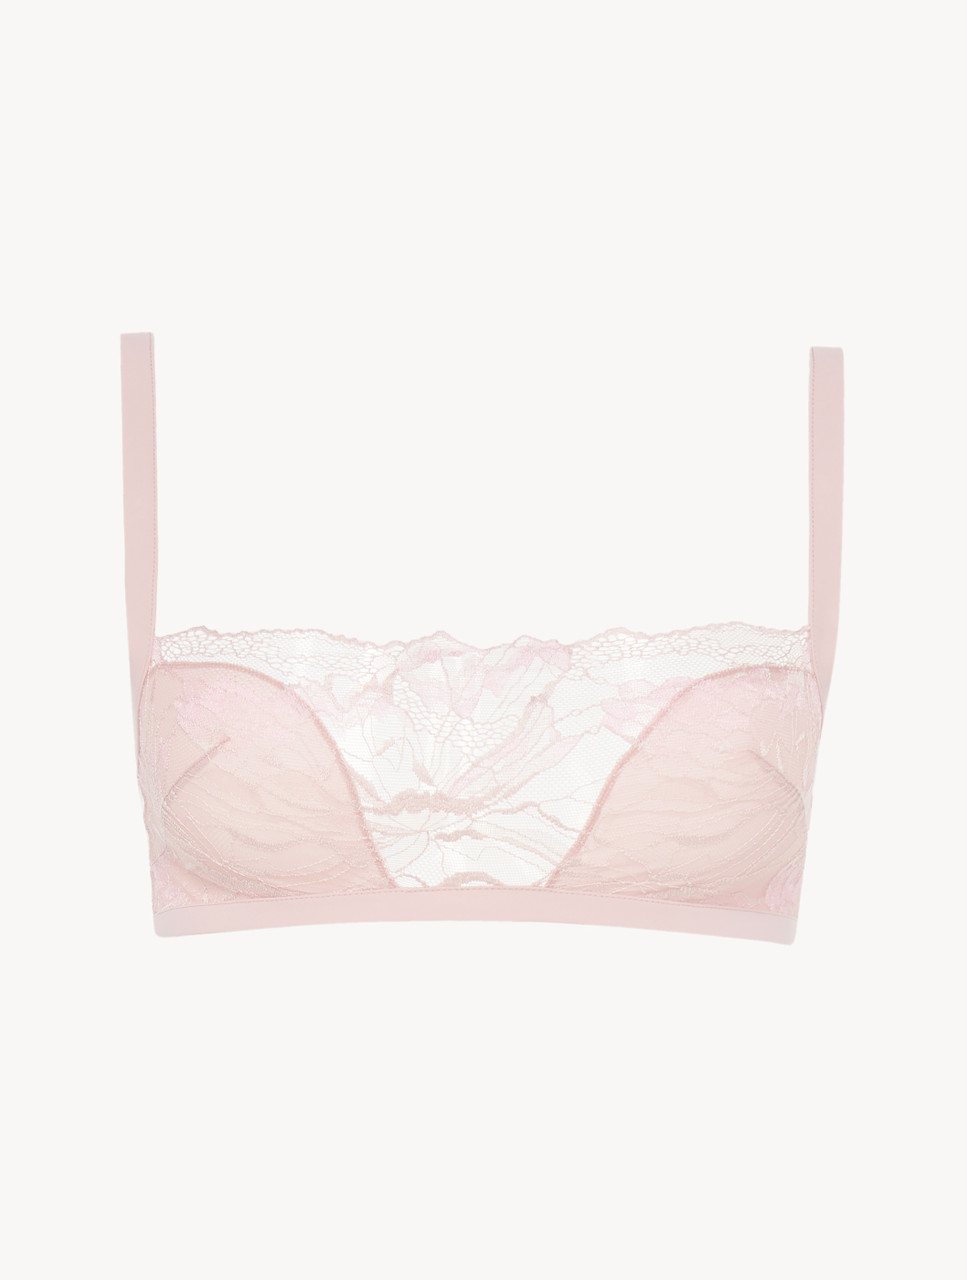 Bralette in pink Lycra with French Leavers lace - La Perla - Russia